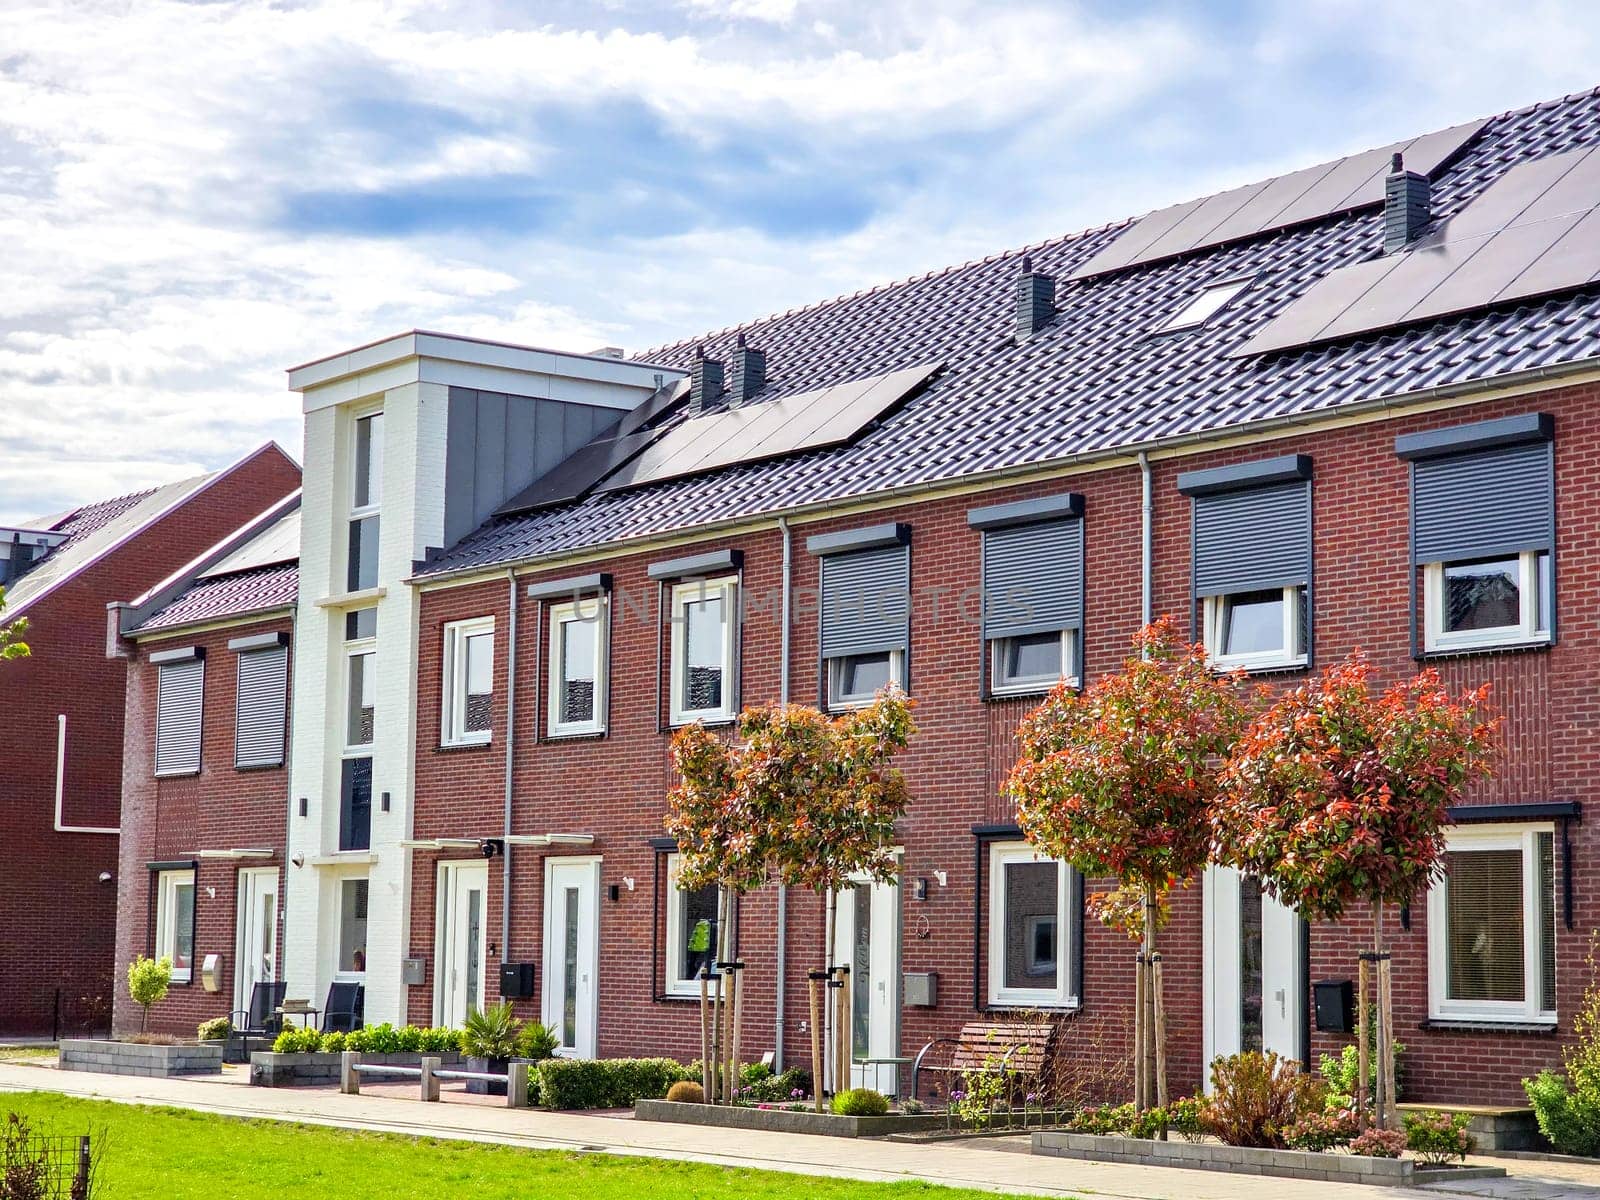 Newly built houses with black solar panels on the roof in the Netherlands